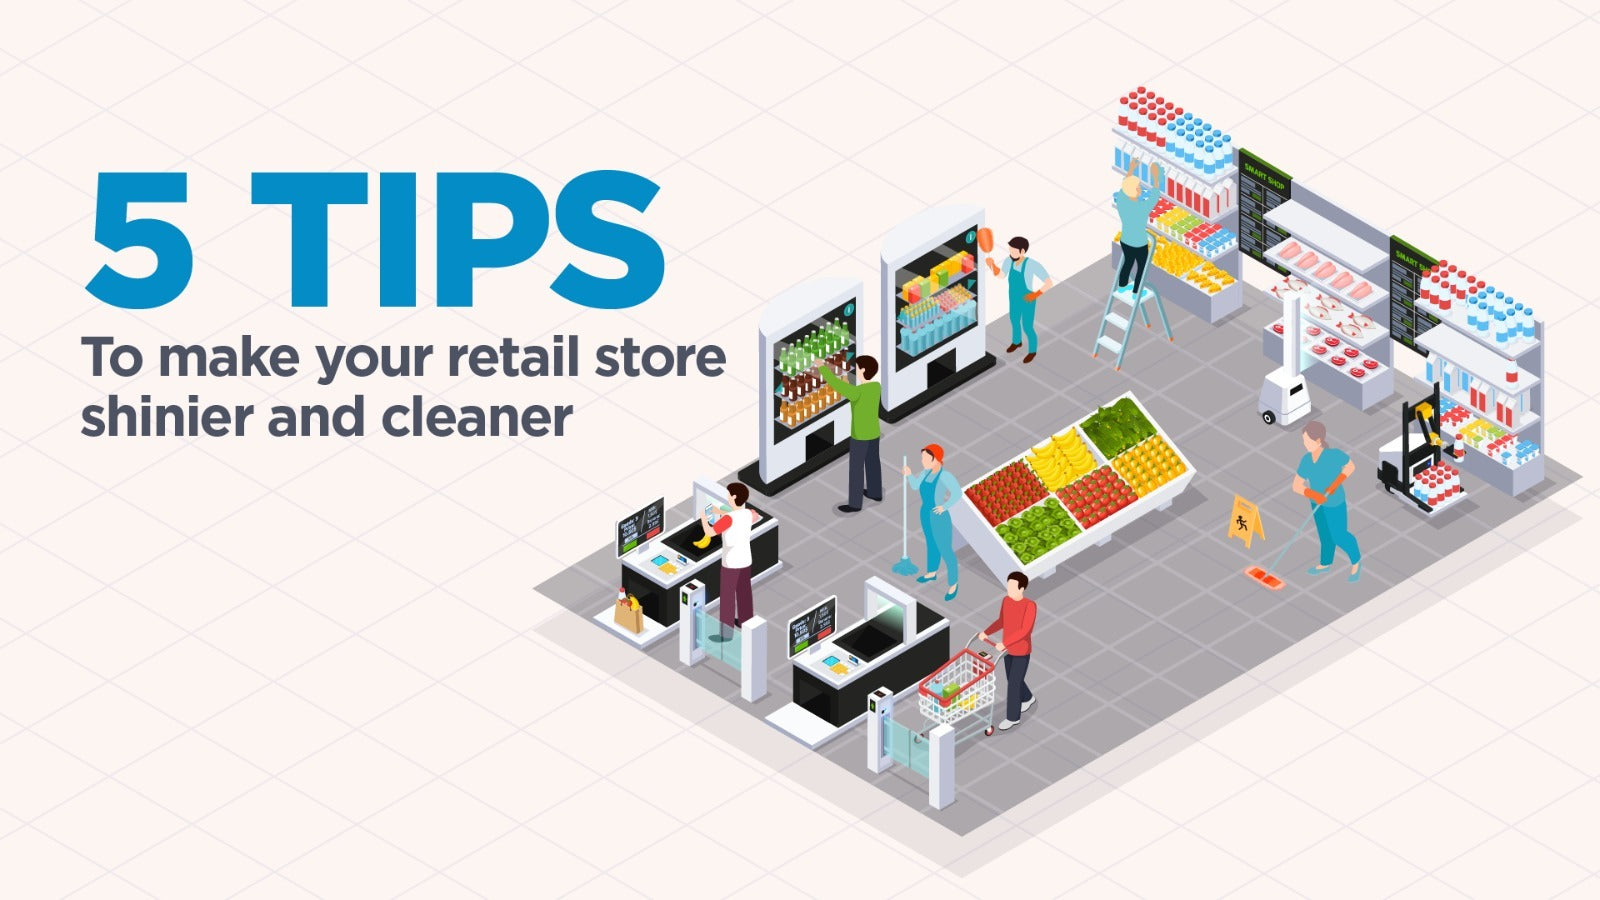 How to get more in-store conversions by making your spaces 10x cleaner.